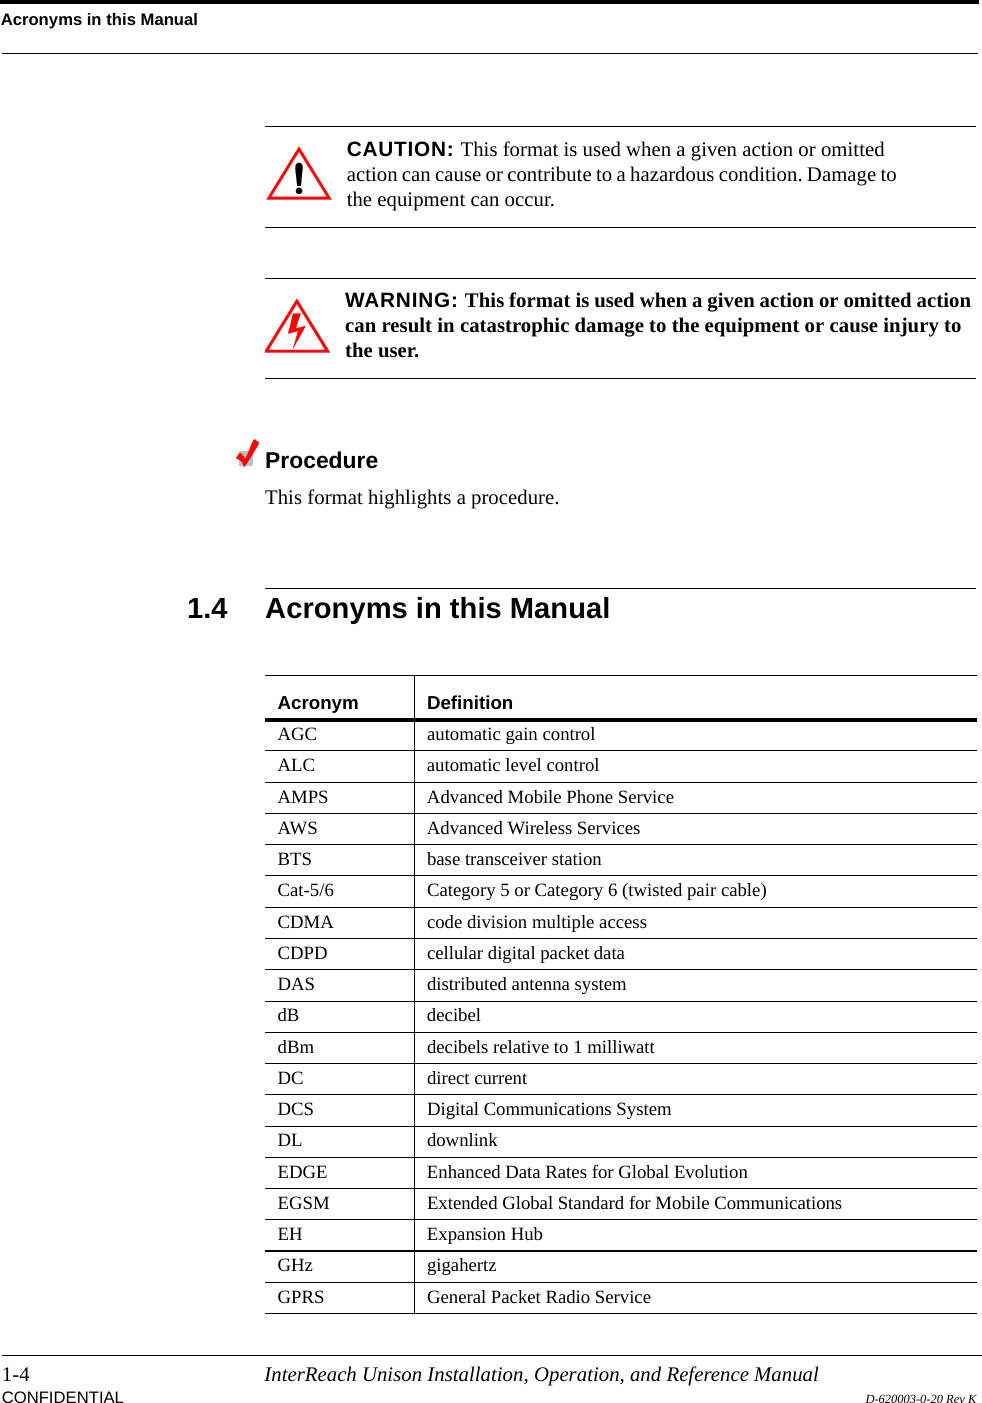 Acronyms in this Manual1-4 InterReach Unison Installation, Operation, and Reference ManualCONFIDENTIAL D-620003-0-20 Rev KCAUTION: This format is used when a given action or omitted action can cause or contribute to a hazardous condition. Damage to the equipment can occur.WARNING: This format is used when a given action or omitted action can result in catastrophic damage to the equipment or cause injury to the user.ProcedureThis format highlights a procedure.1.4 Acronyms in this ManualAcronym DefinitionAGC automatic gain controlALC automatic level controlAMPS Advanced Mobile Phone Service AWS Advanced Wireless ServicesBTS base transceiver stationCat-5/6 Category 5 or Category 6 (twisted pair cable)CDMA code division multiple accessCDPD cellular digital packet dataDAS distributed antenna systemdB decibeldBm decibels relative to 1 milliwattDC direct currentDCS Digital Communications SystemDL downlinkEDGE Enhanced Data Rates for Global Evolution EGSM Extended Global Standard for Mobile CommunicationsEH Expansion HubGHz gigahertzGPRS General Packet Radio Service 